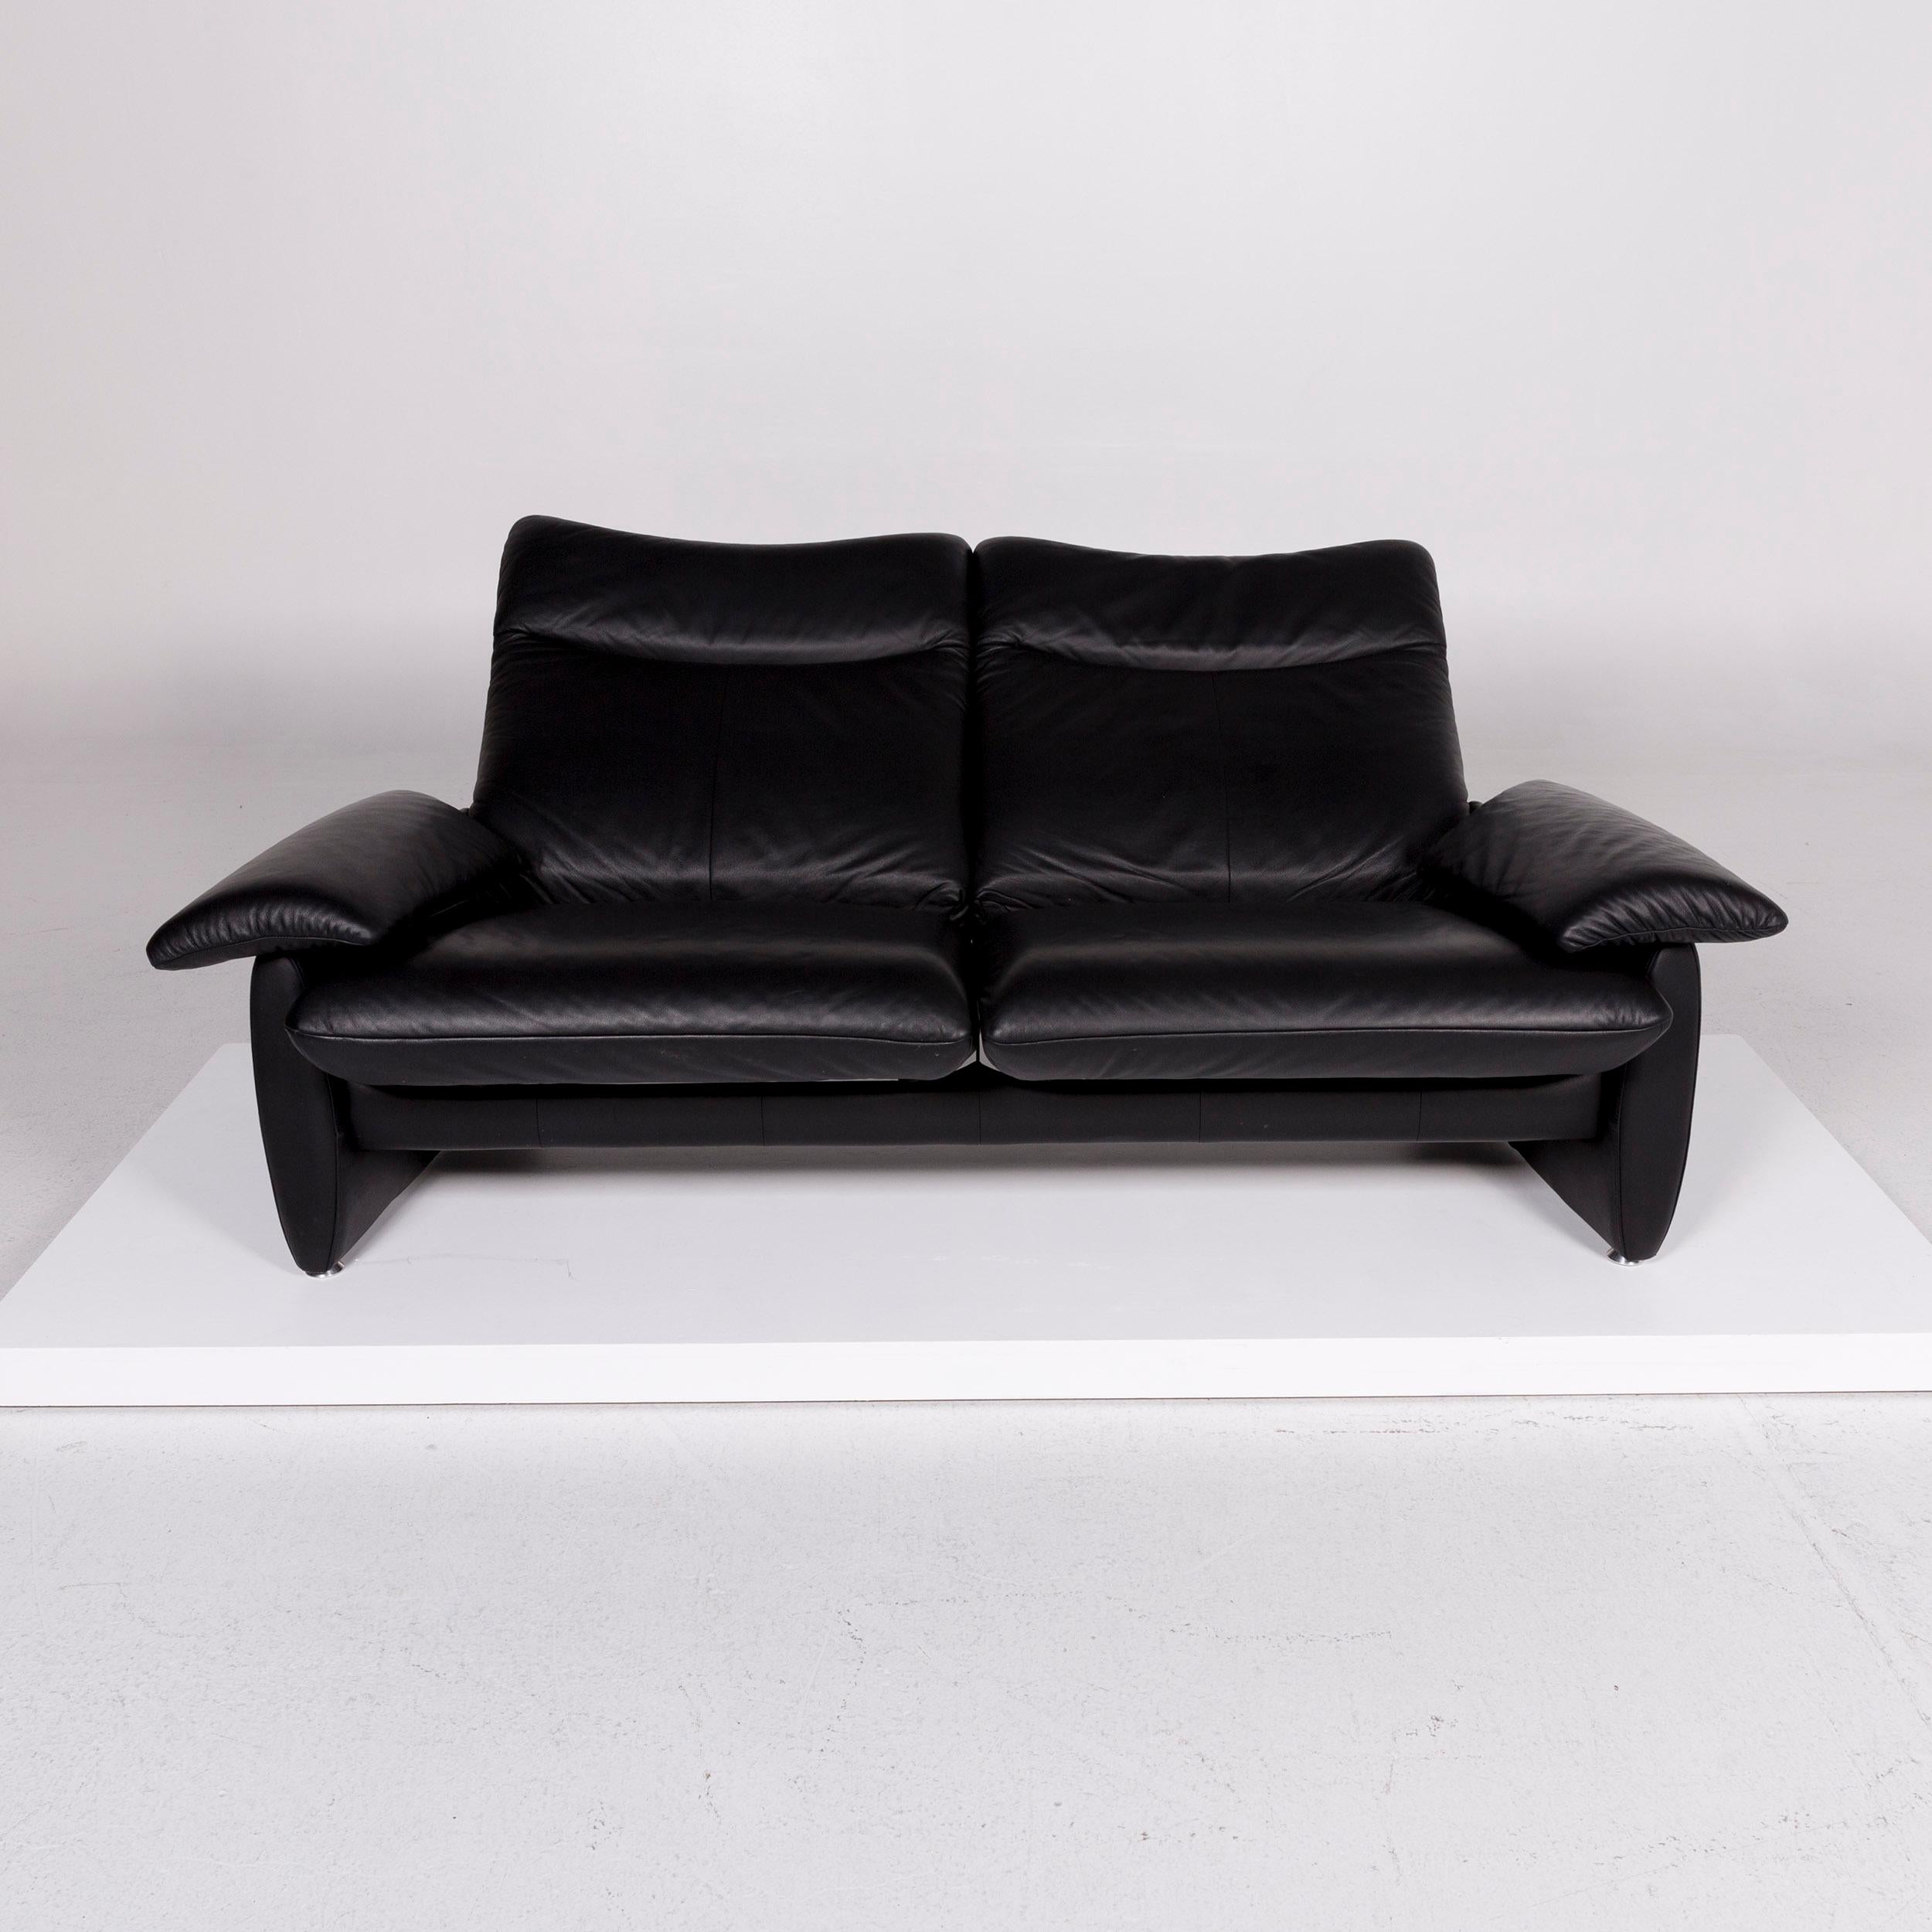 We bring to you a Laauser leather sofa black two-seat function couch.
 
Product measurements in centimeters:
 
Depth 83
Width 189
Height 72
Seat-height 43
Rest-height 56
Seat-depth 59
Seat-width 125
Back-height 30.


 